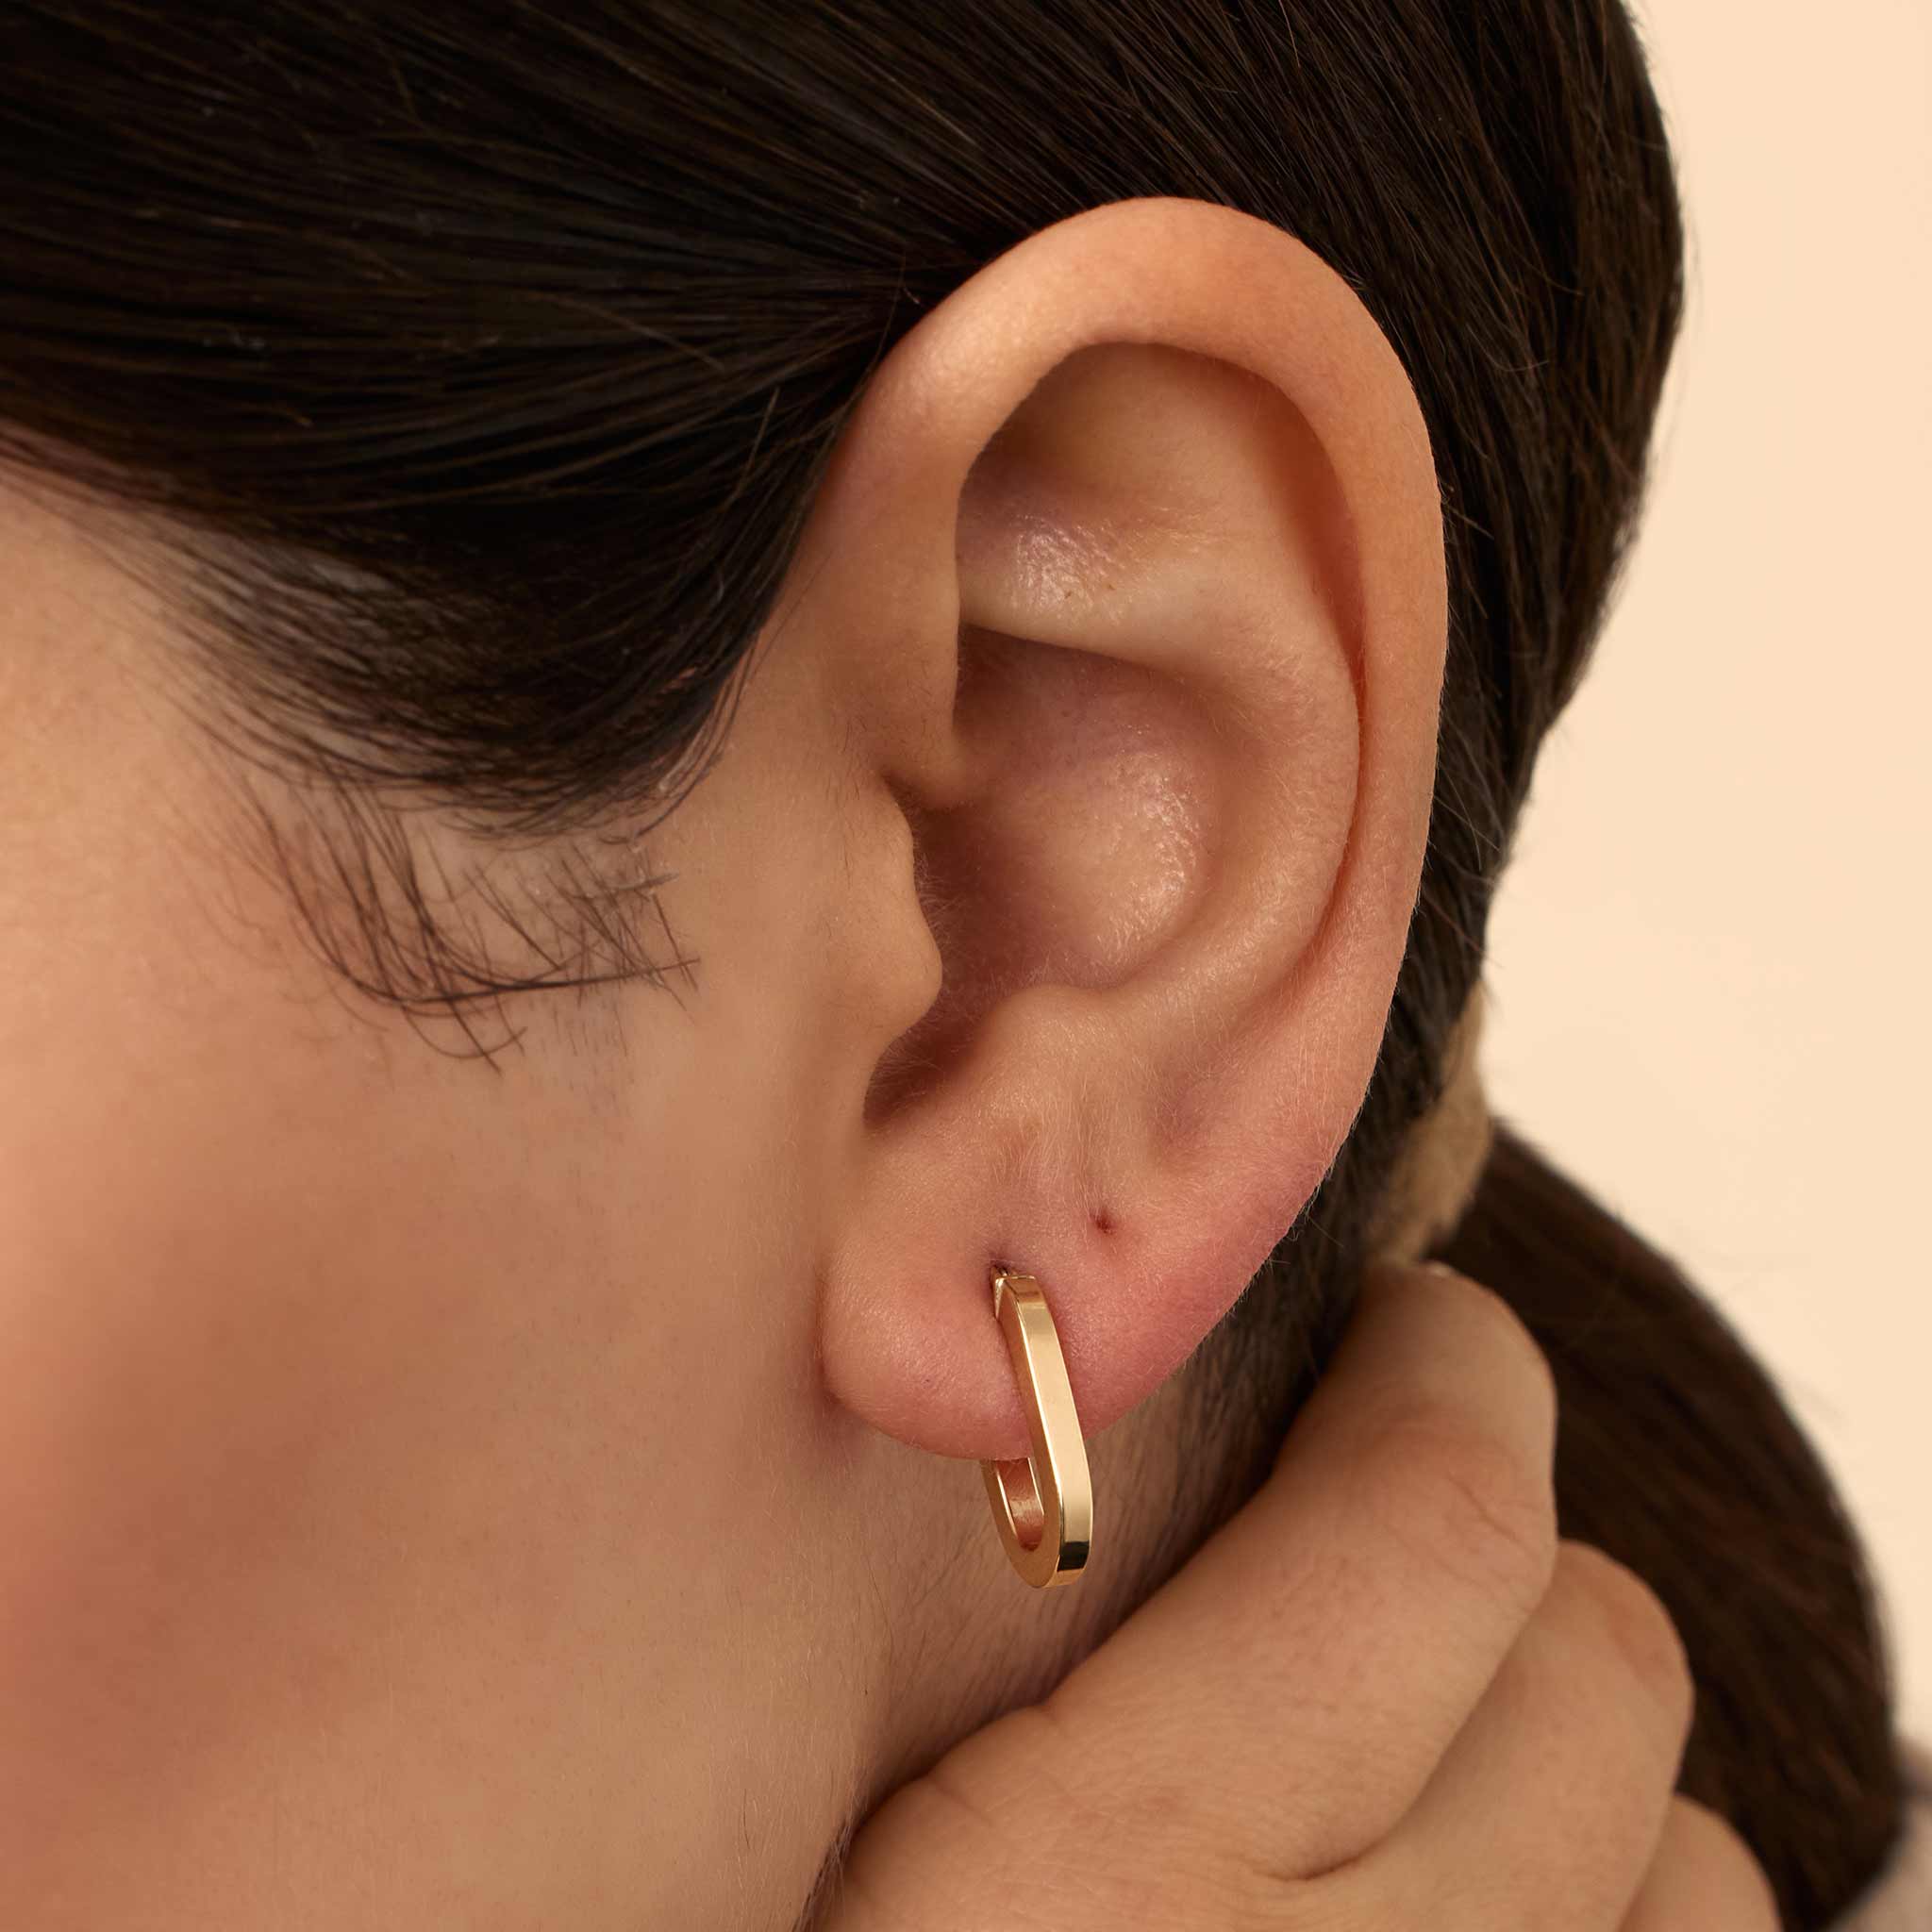 Aggregate more than 233 gold drop earrings best